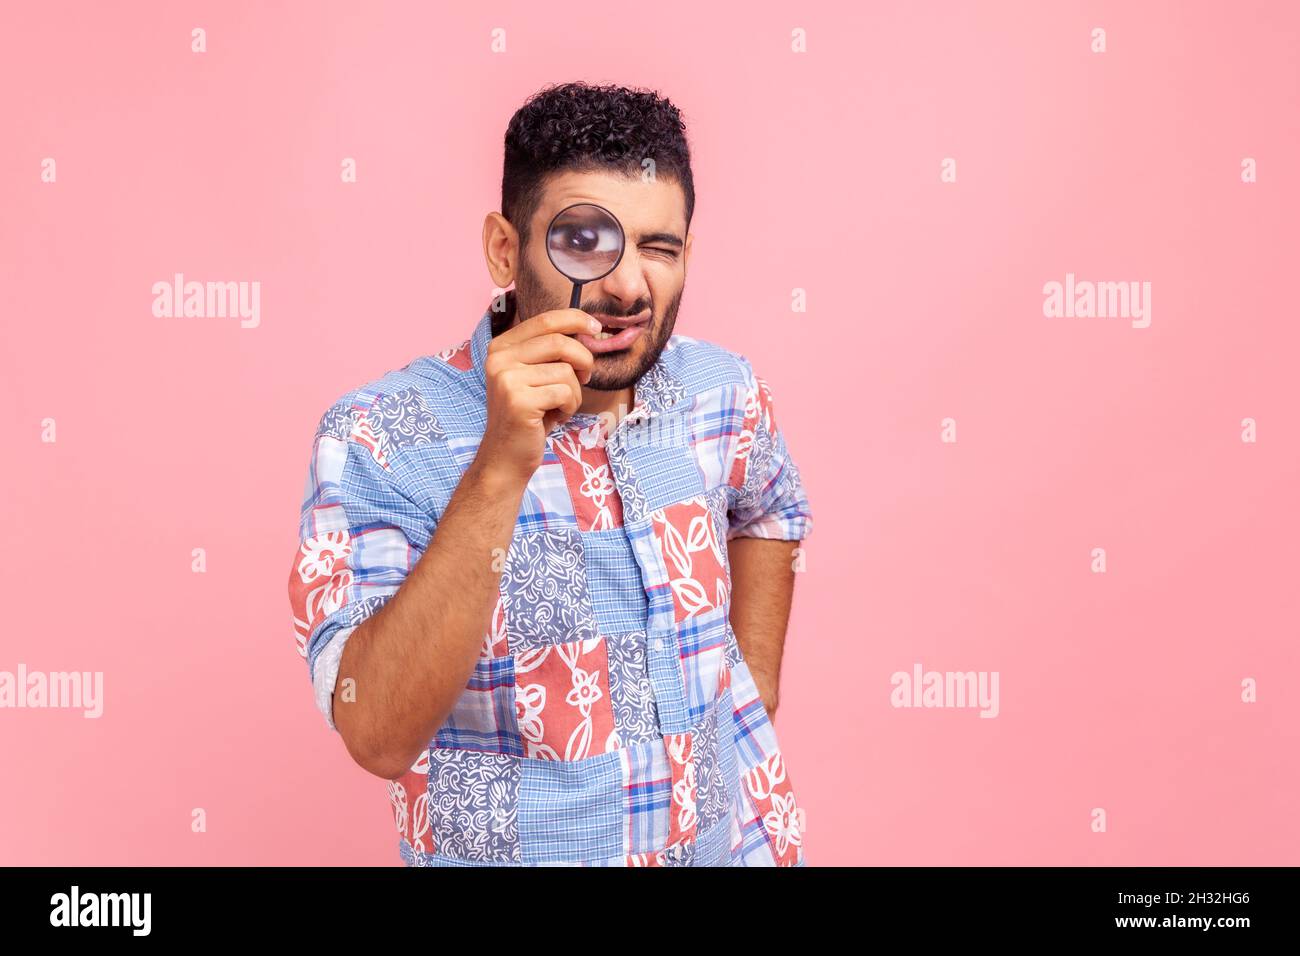 Bearded man in blue casual style shirt standing, holding magnifying glass and looking at camera with big zoom eye, having funny facial expression. Indoor studio shot isolated on pink background. Stock Photo